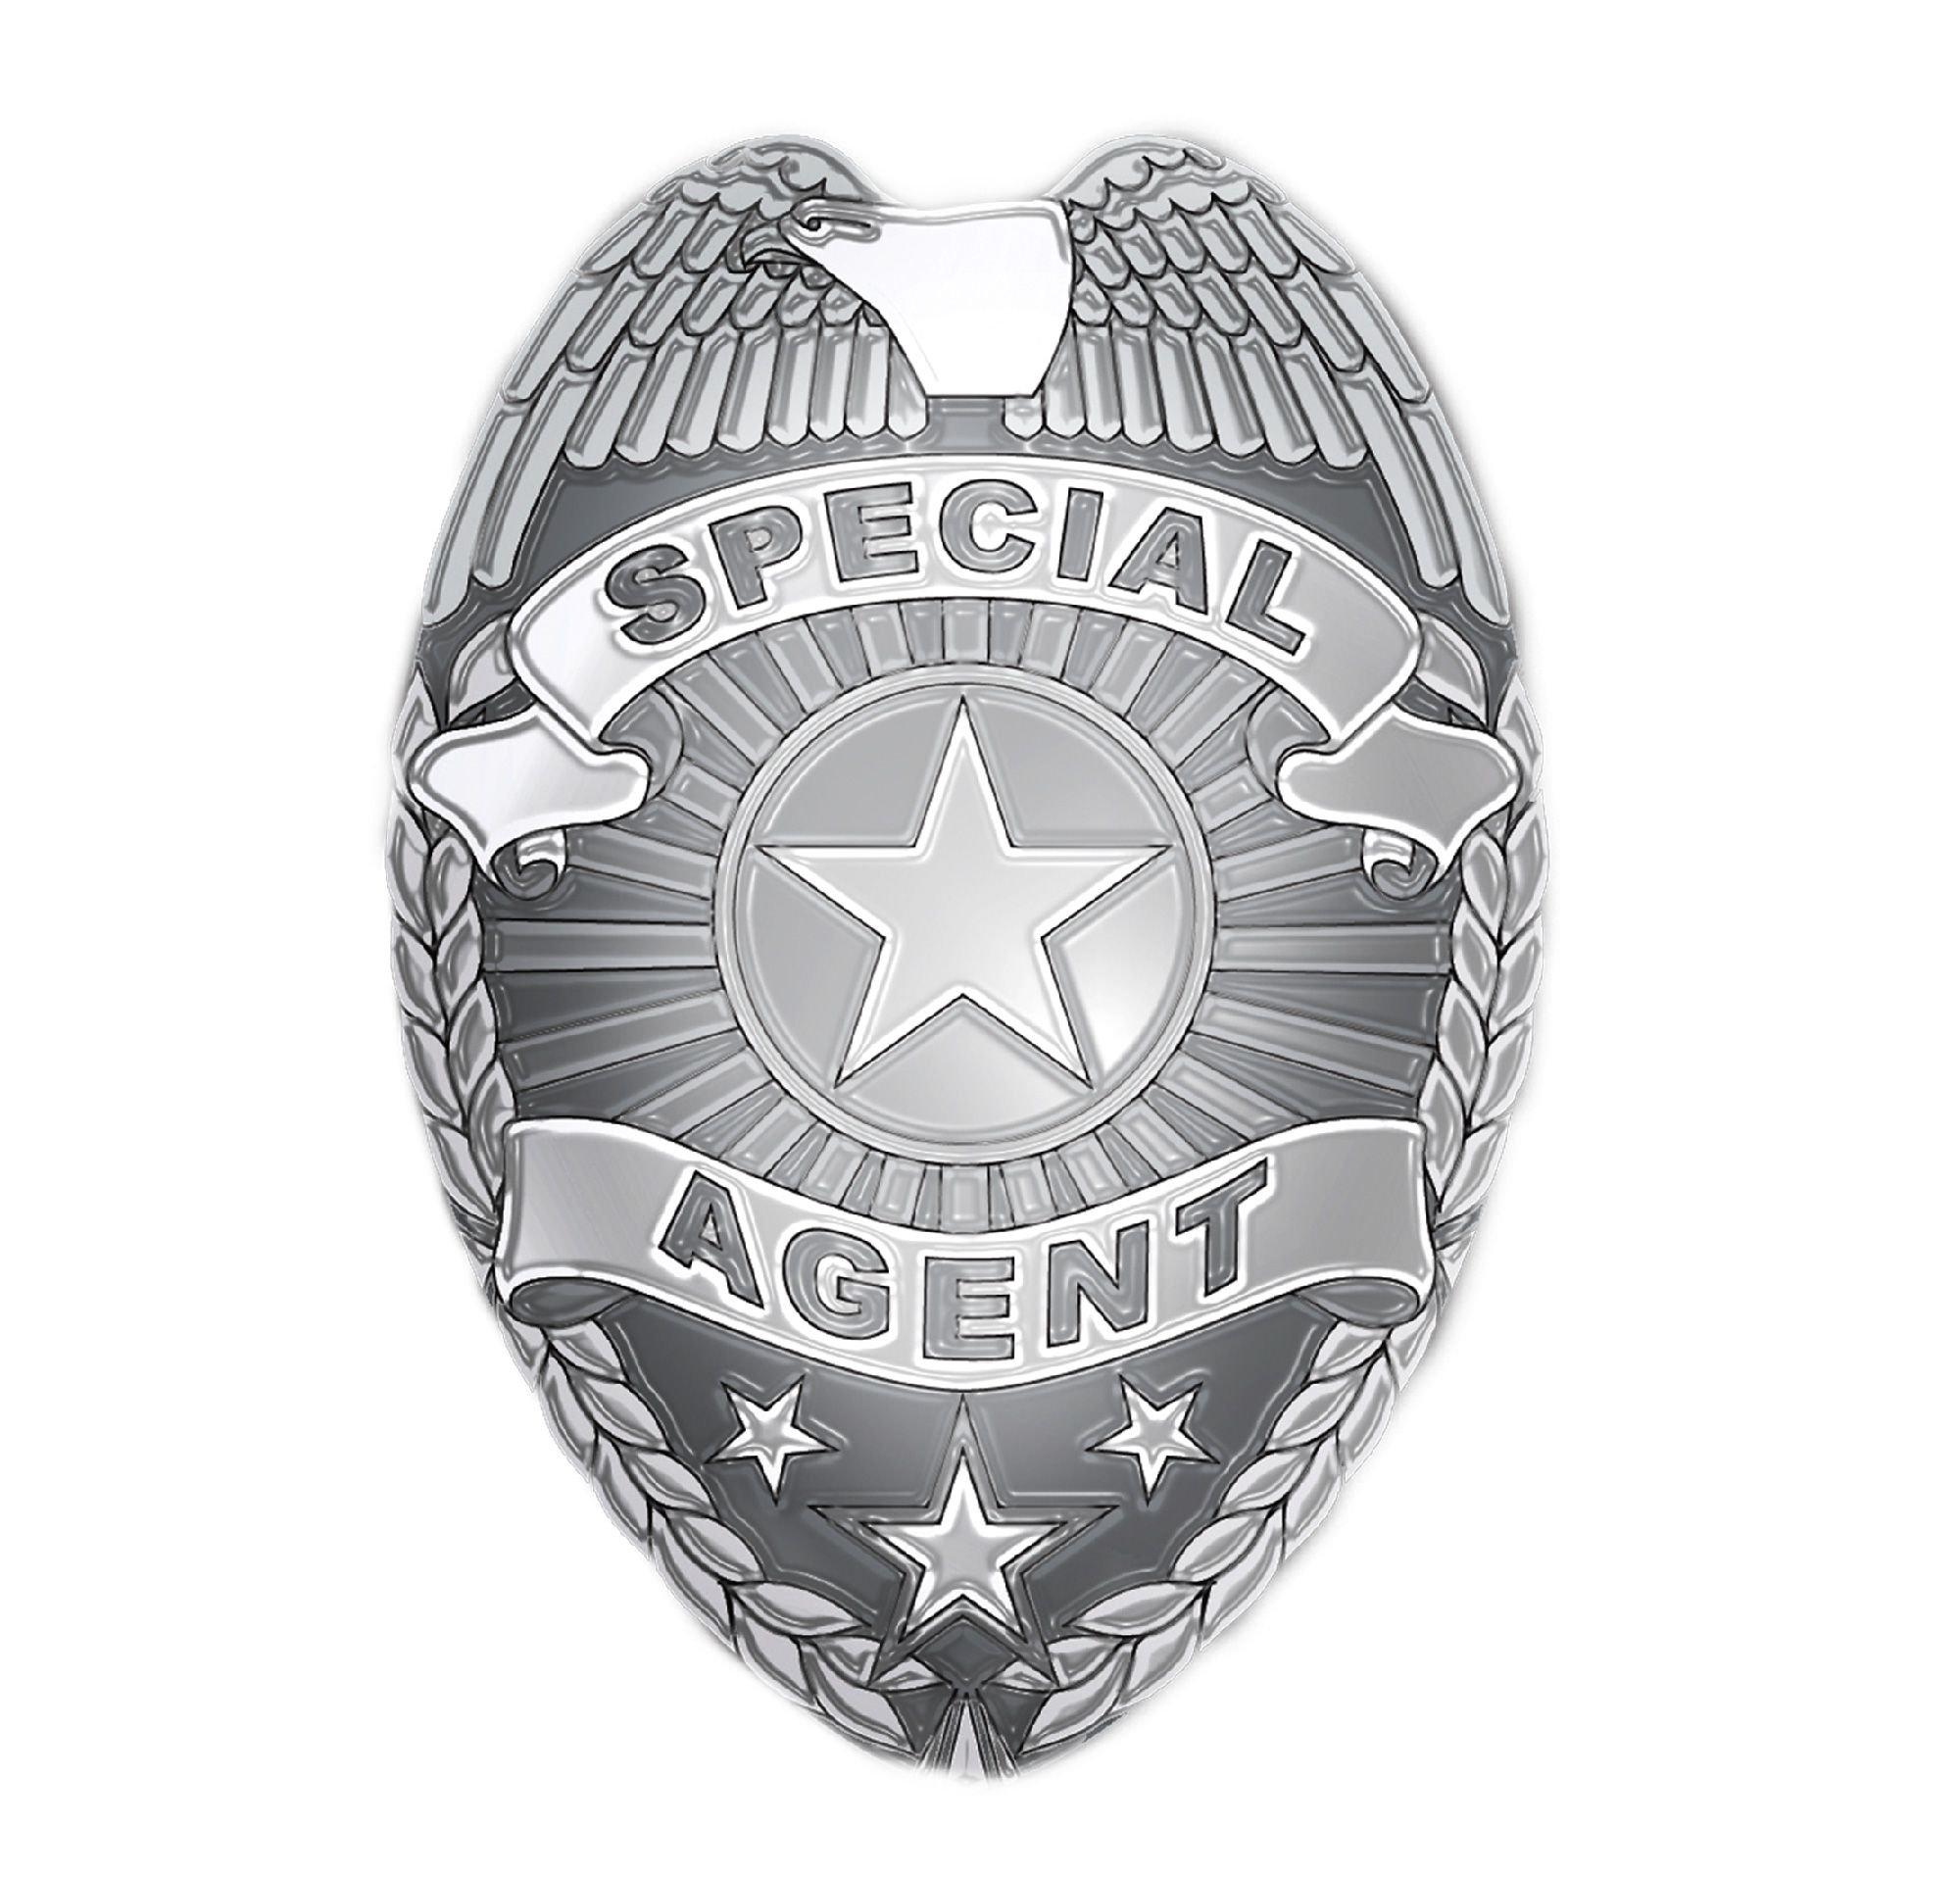 Special Agent Badge - Silver